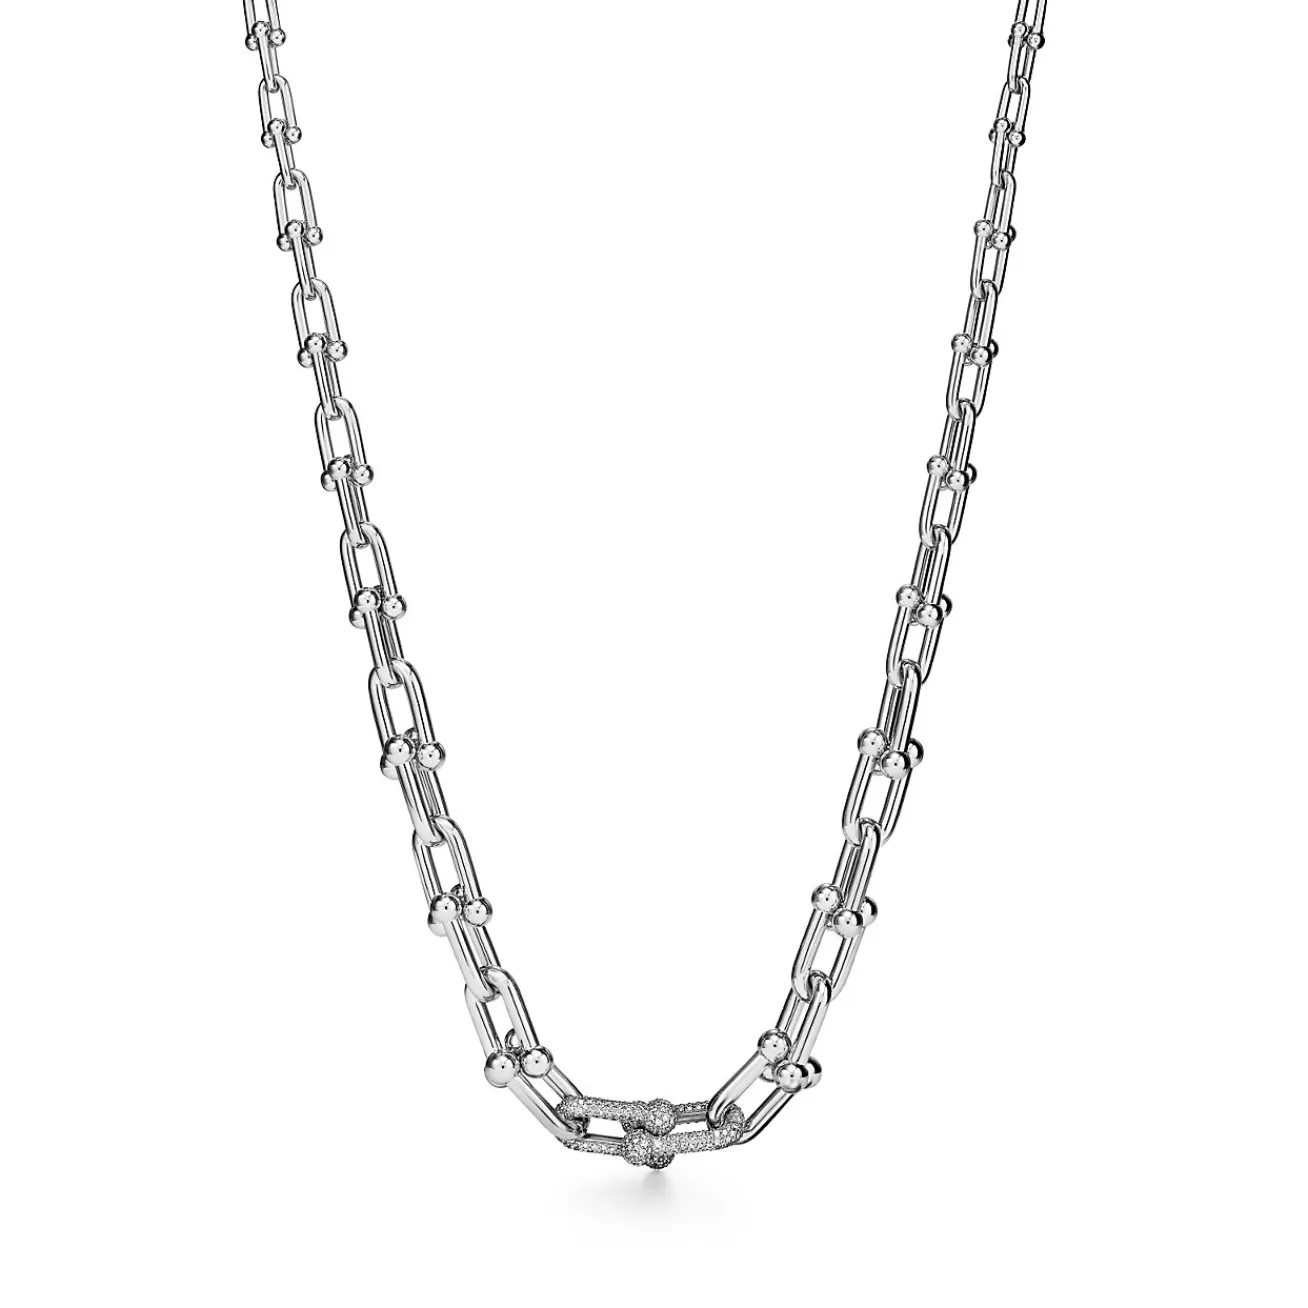 Tiffany & Co. Tiffany HardWear Graduated Link Necklace in White Gold with Pavé Diamonds | ^ Necklaces & Pendants | Men's Jewelry